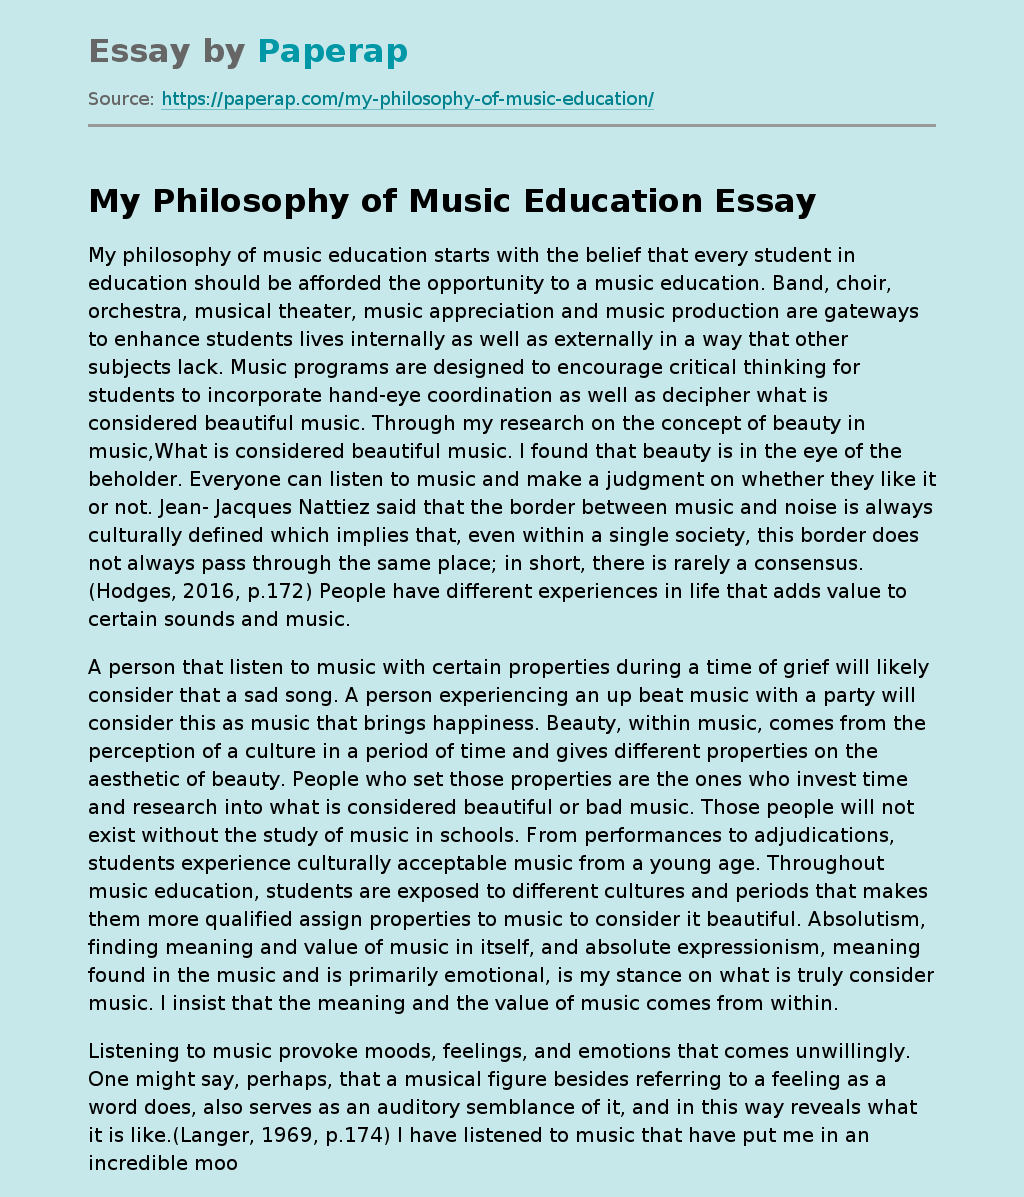 My Philosophy of Music Education